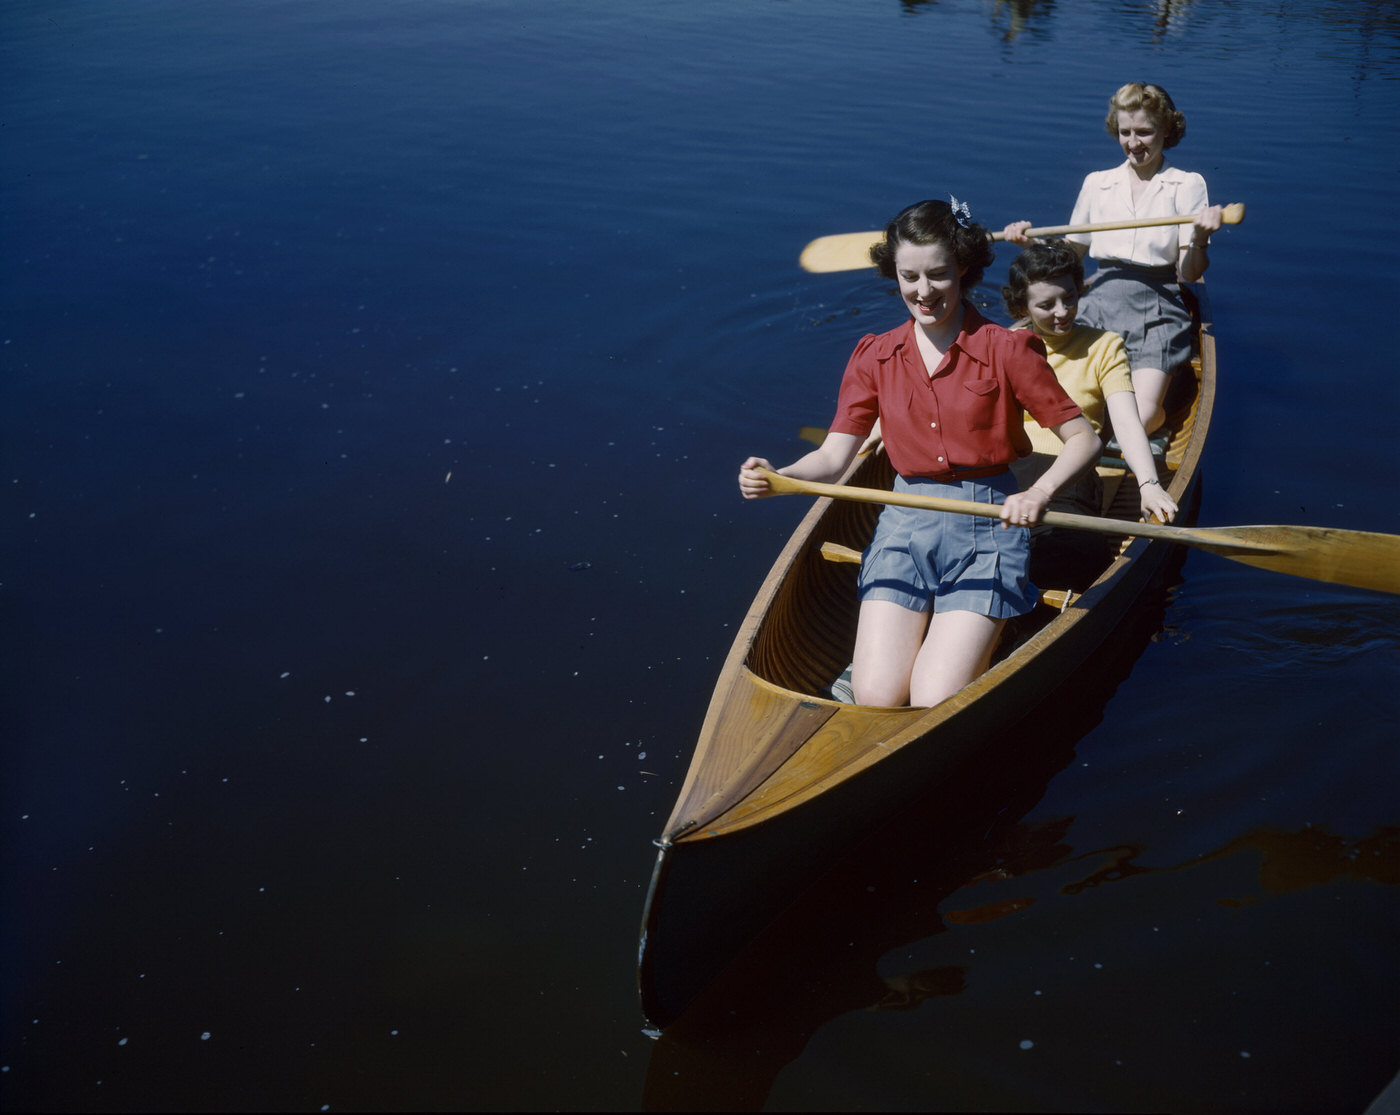 Three women in the Canadian Army paddling a canoe, Canada